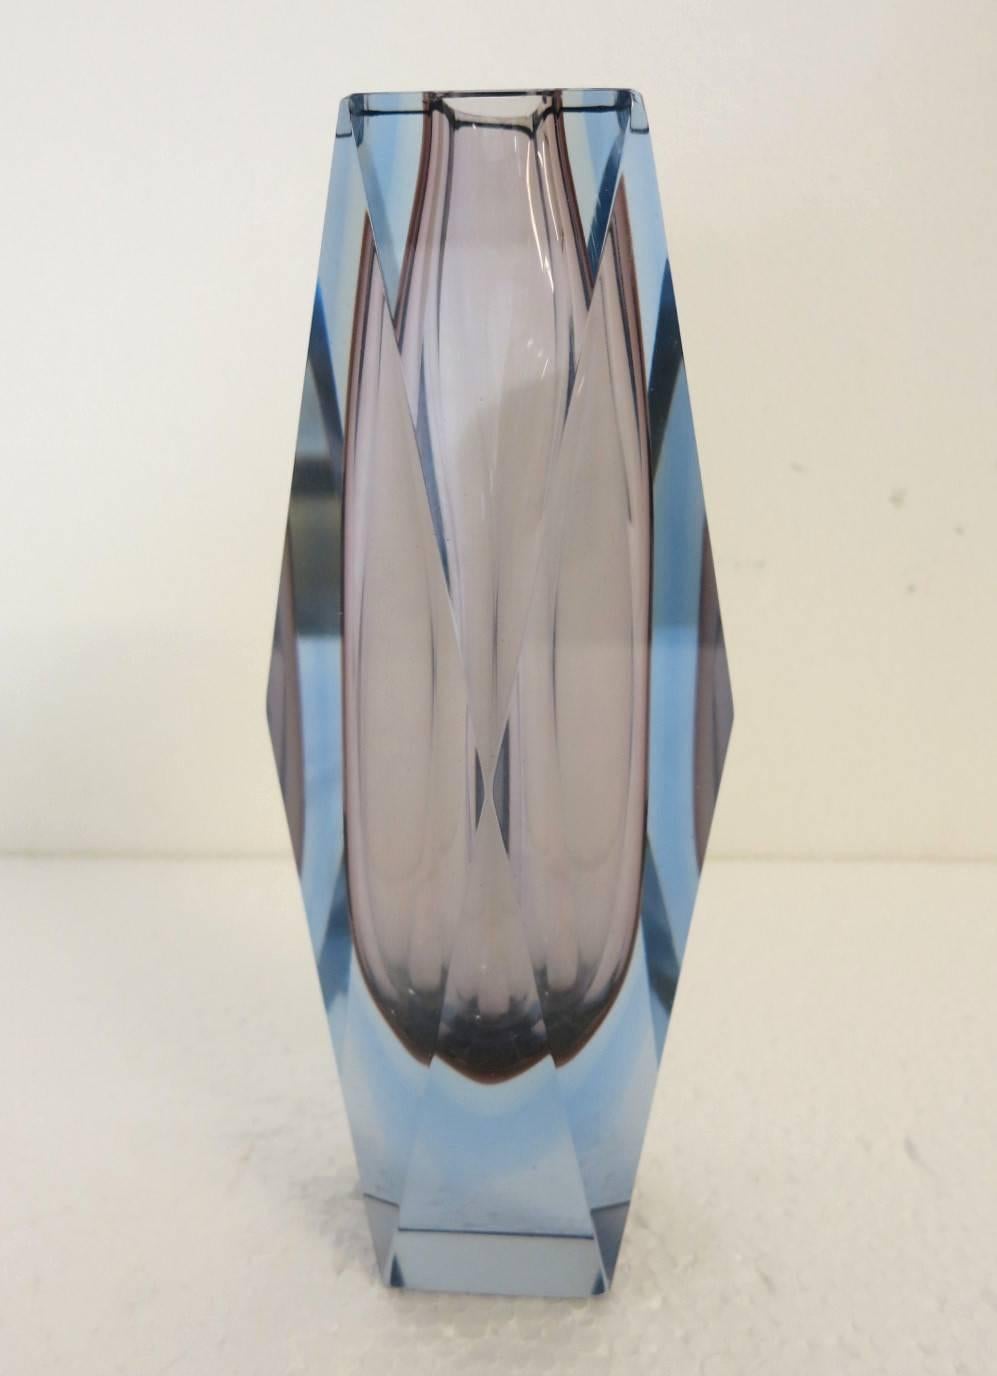 Italian amethyst and blue Murano glass faceted vase, with Sommerso technique.